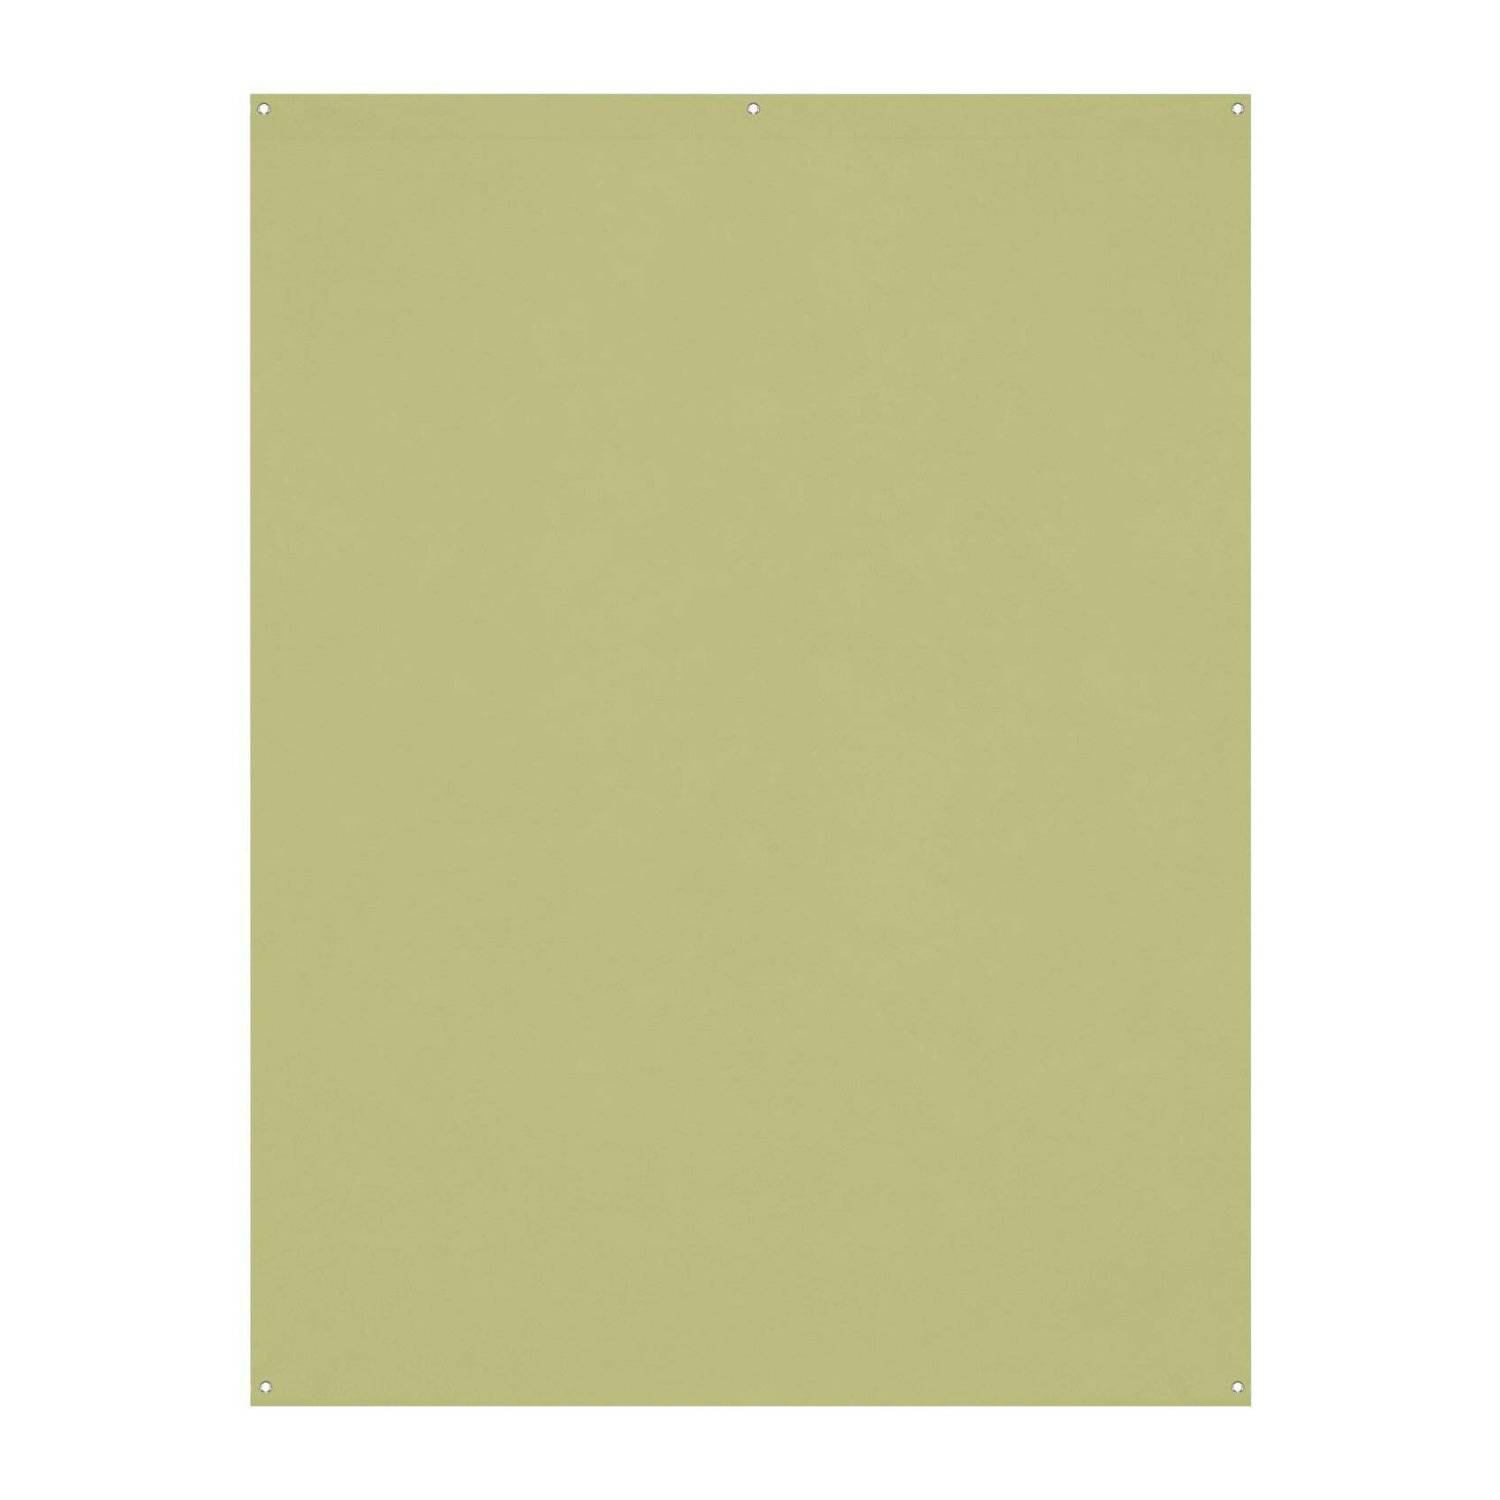 Westcott X-Drop Wrinkle-Resistant Backdrop, For  Video Conferencing (Light Moss Green, 5 x 7 Feet)